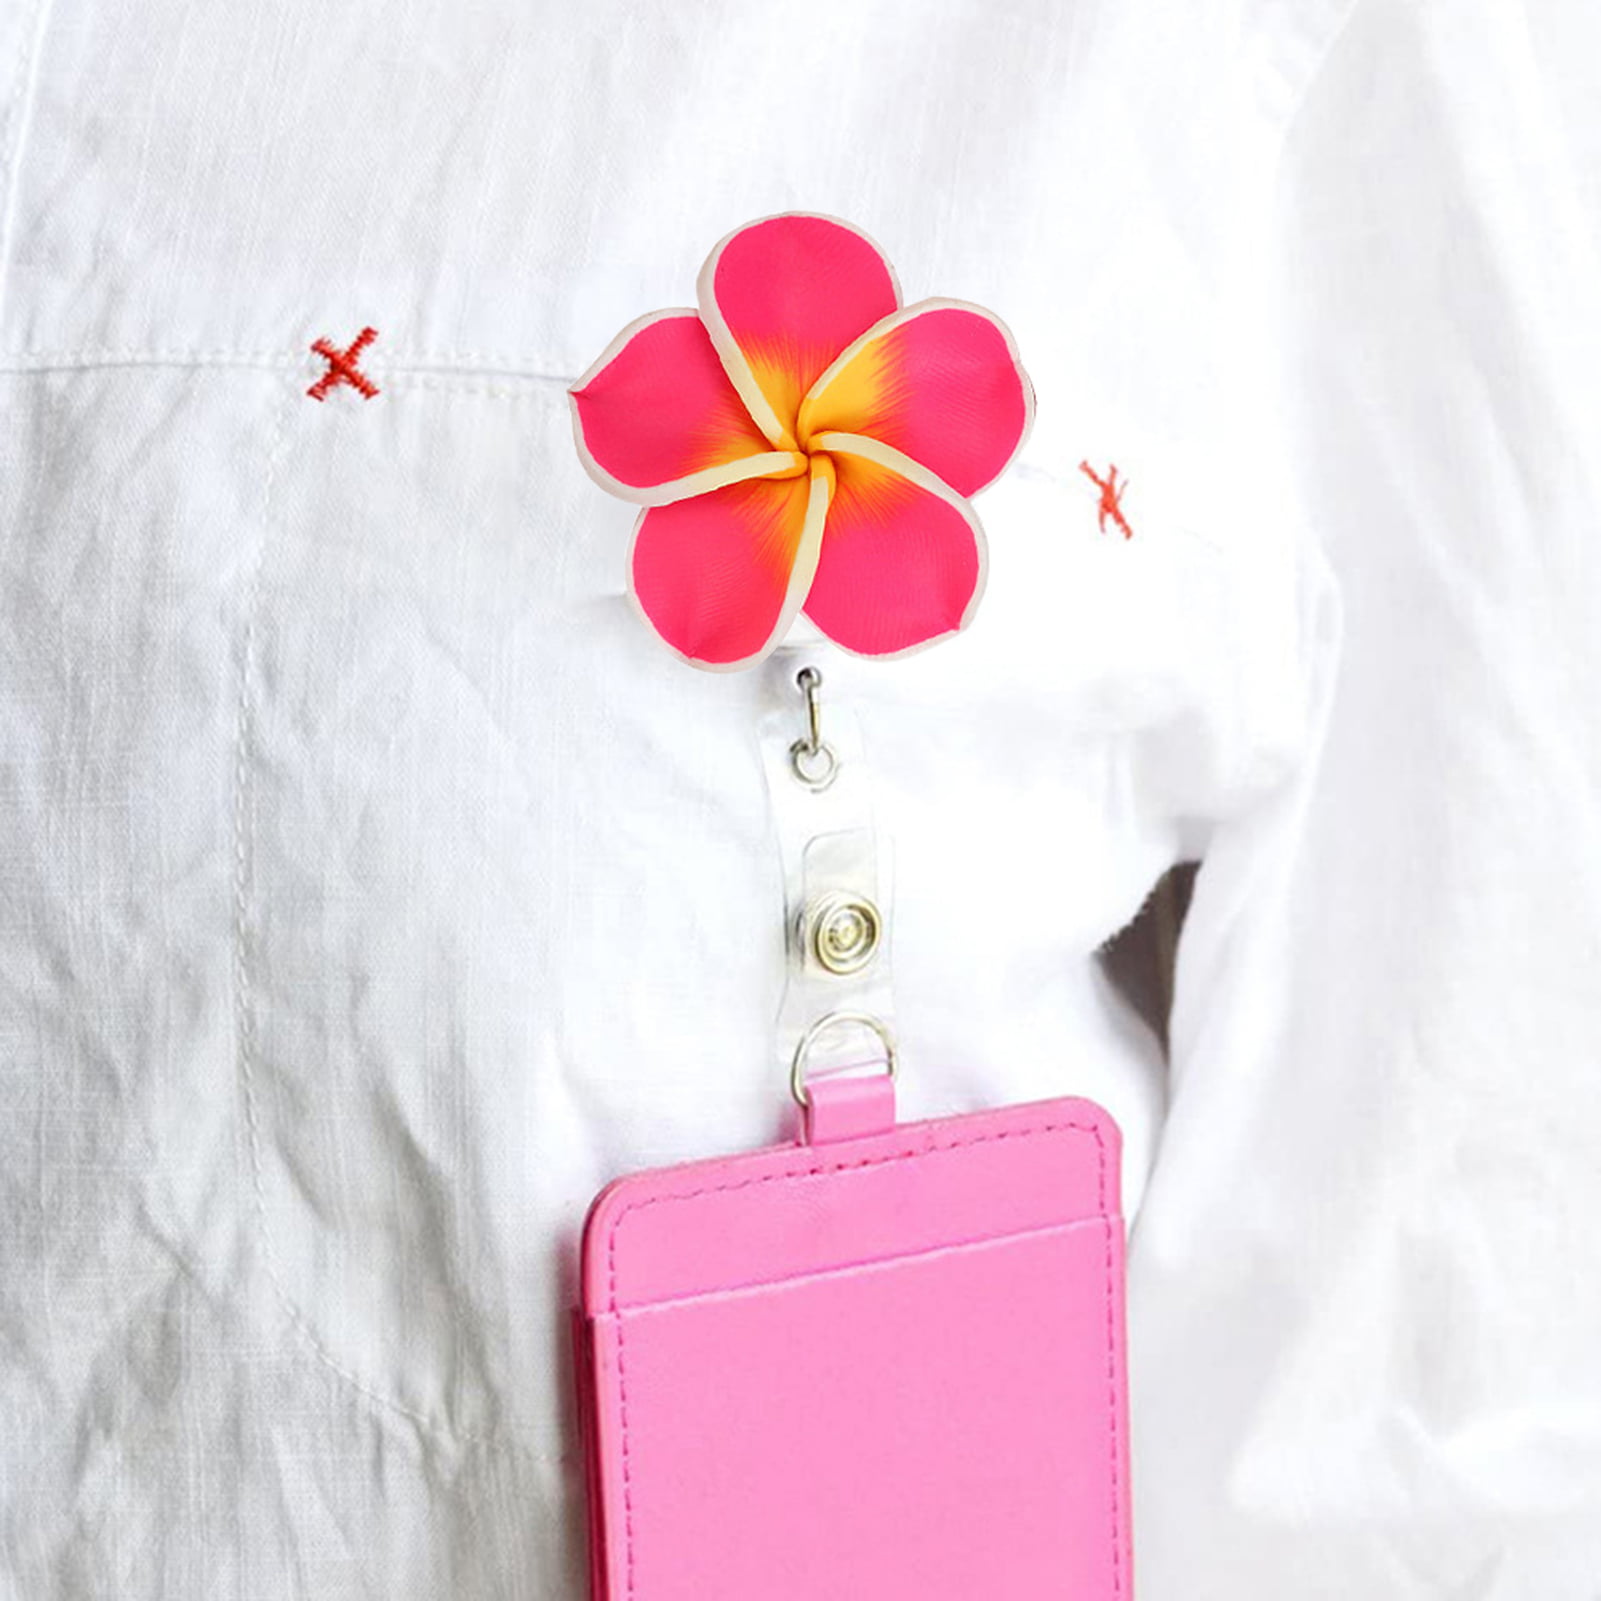 Visland 4pcs Flower Retractable Name Badge Reel Staff Work Card Holder Chest Pocket Clip ID Tag Card Accessories Clip, Pink